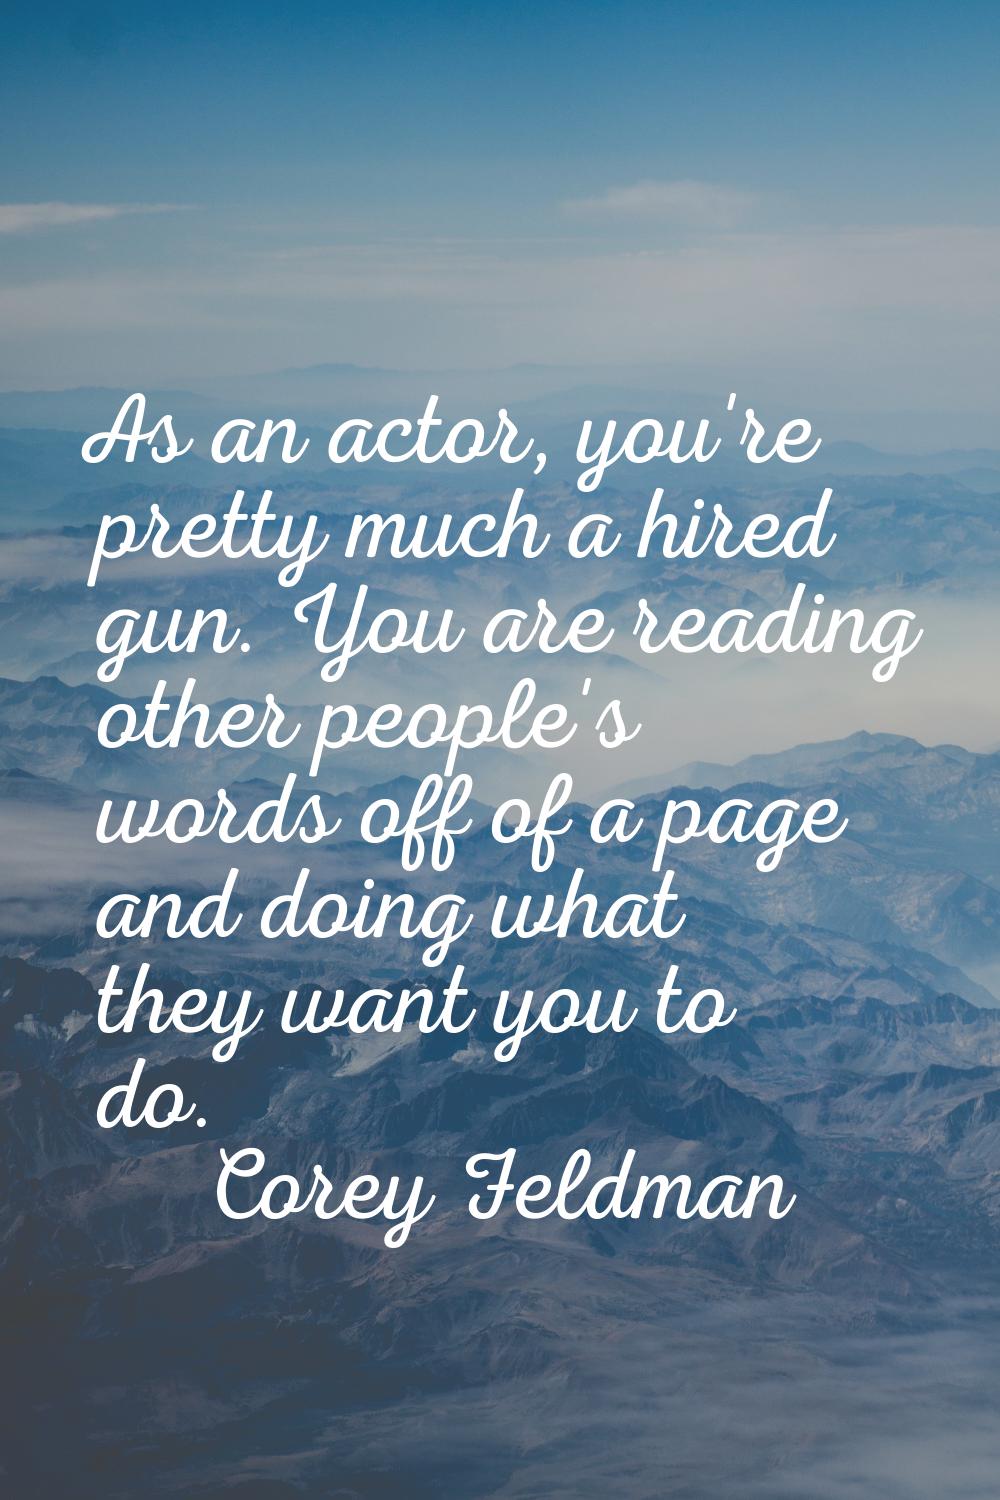 As an actor, you're pretty much a hired gun. You are reading other people's words off of a page and